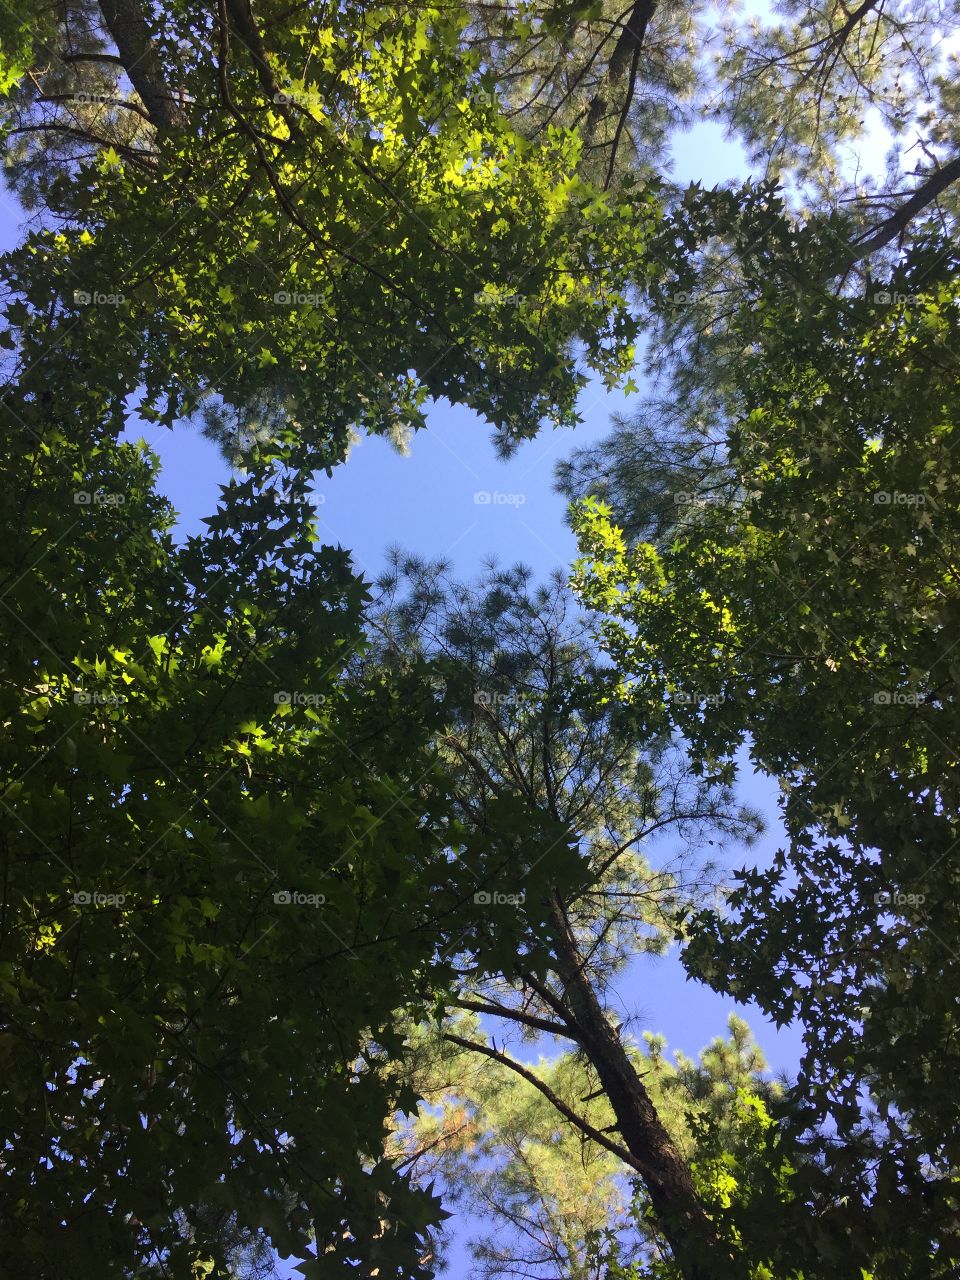 Looking up through trees
